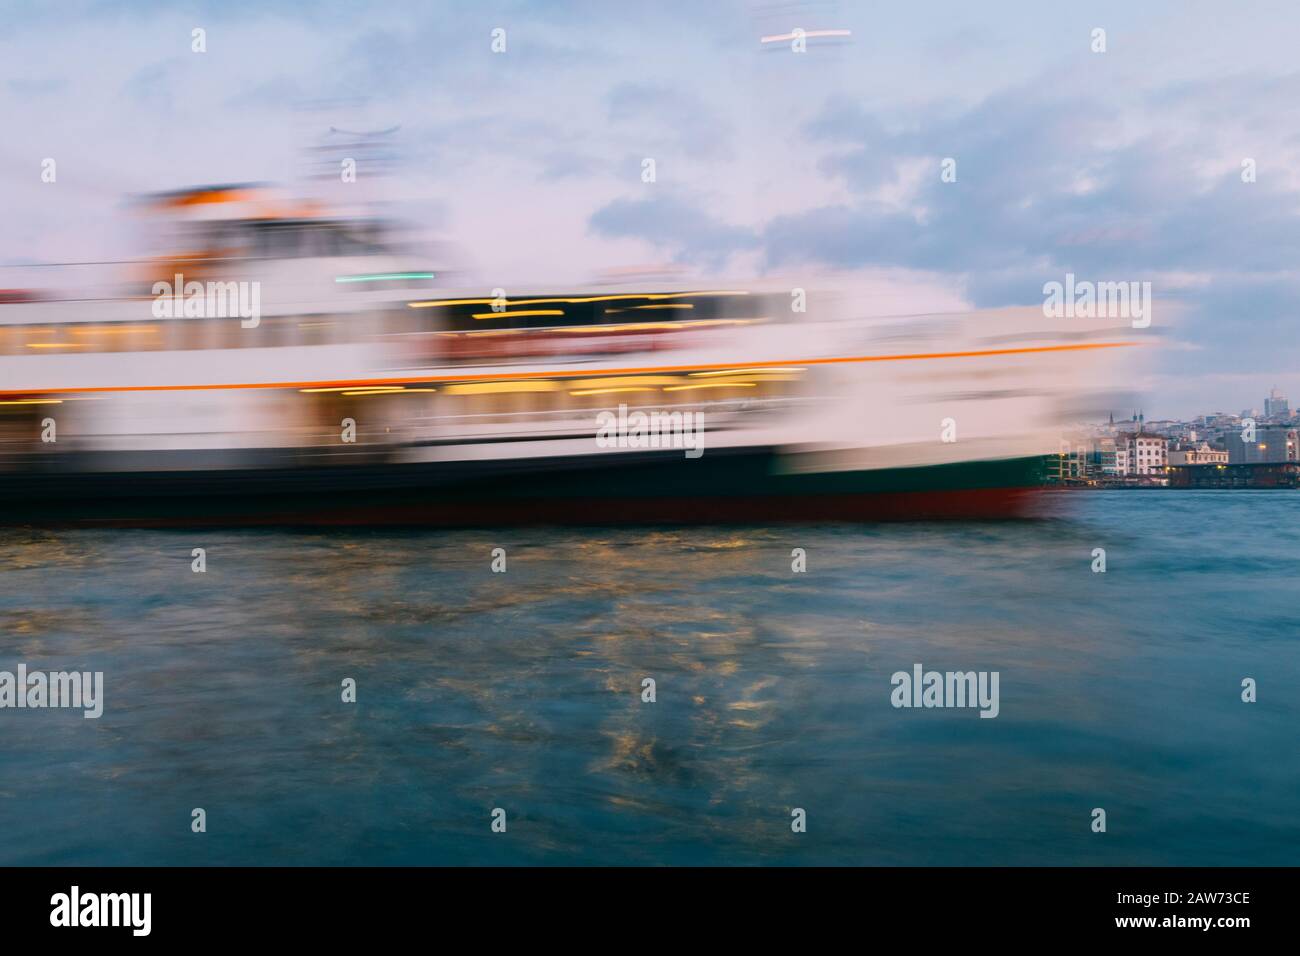 Istanbul, Turkey - Jan 15, 2020: An abstract image of a ferry boat  in the Golden Horn , Istanbul, Turkey, Stock Photo